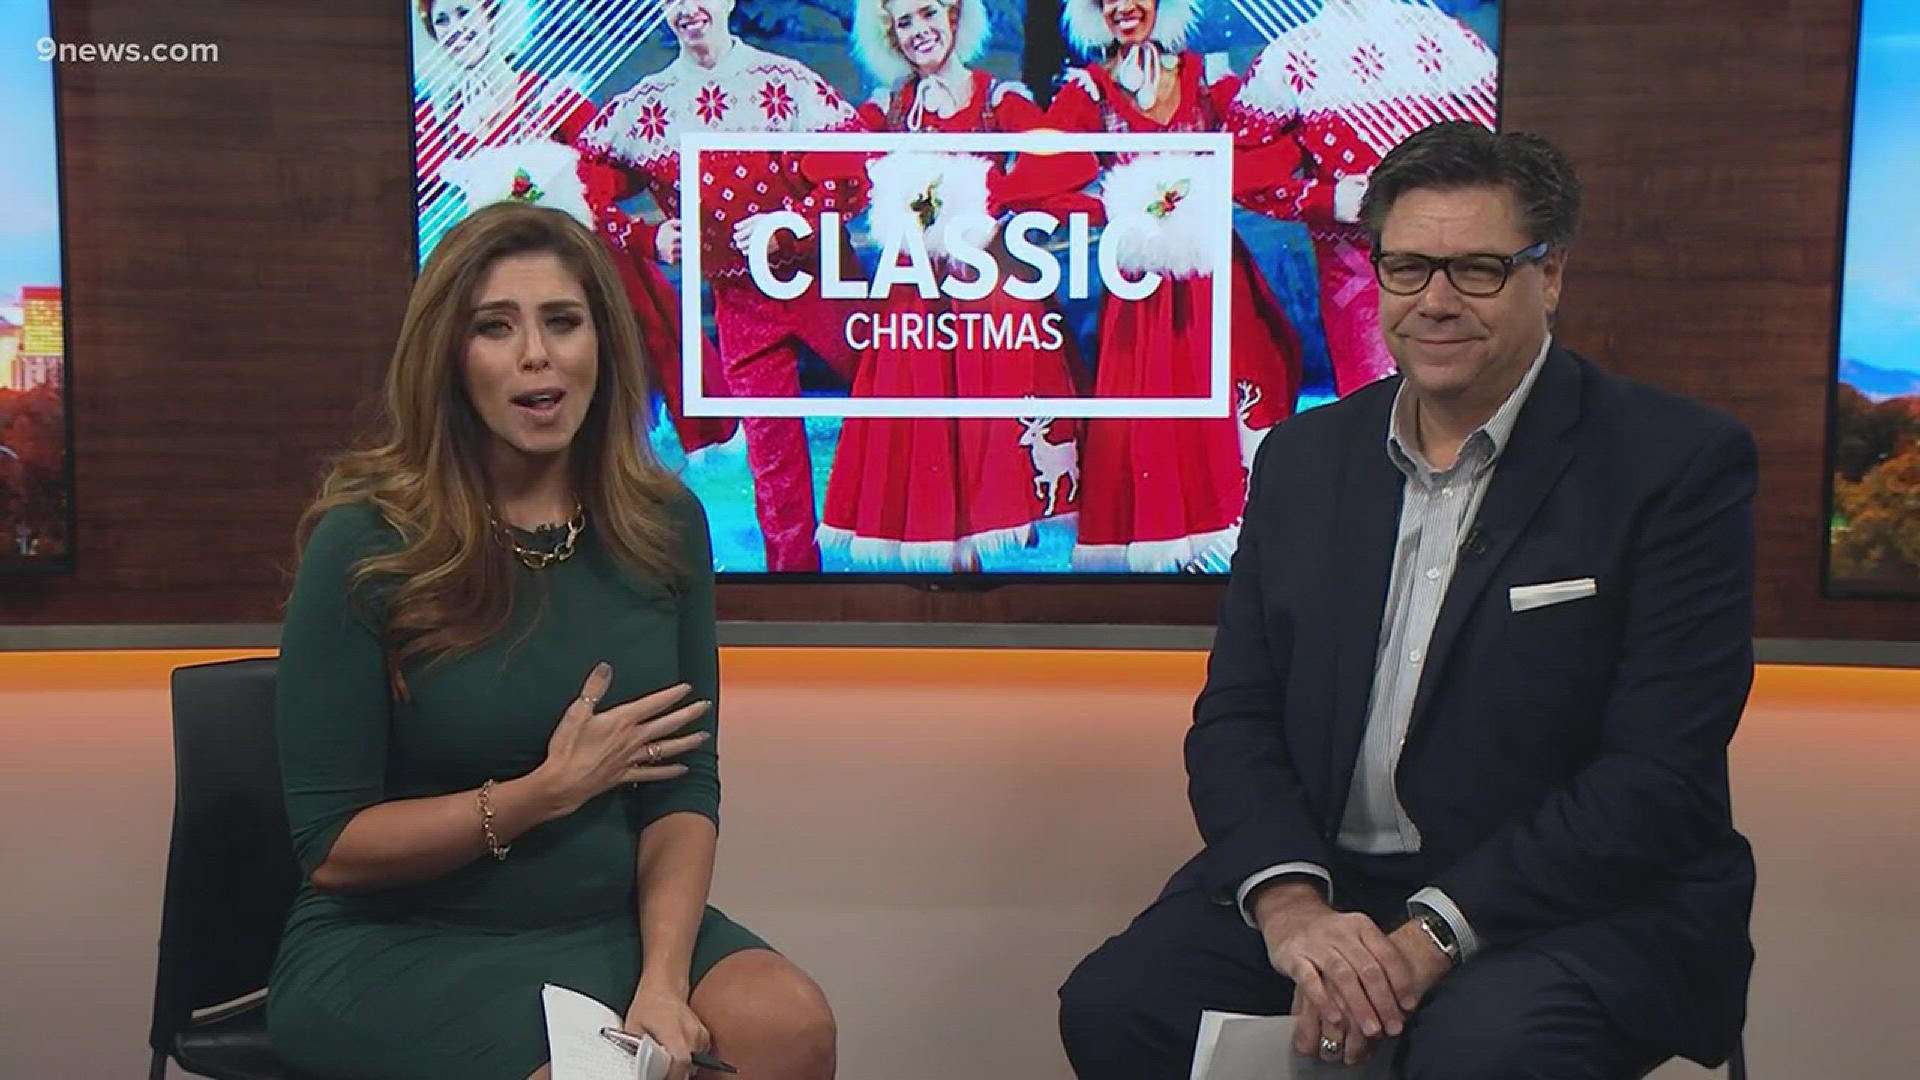 The Denver Center for the Performing Arts has a great holiday lineup this year. Jeff Hovorka, the Director of Sales and Marketing, joins 9NEWS to talk about some of the festive productions.